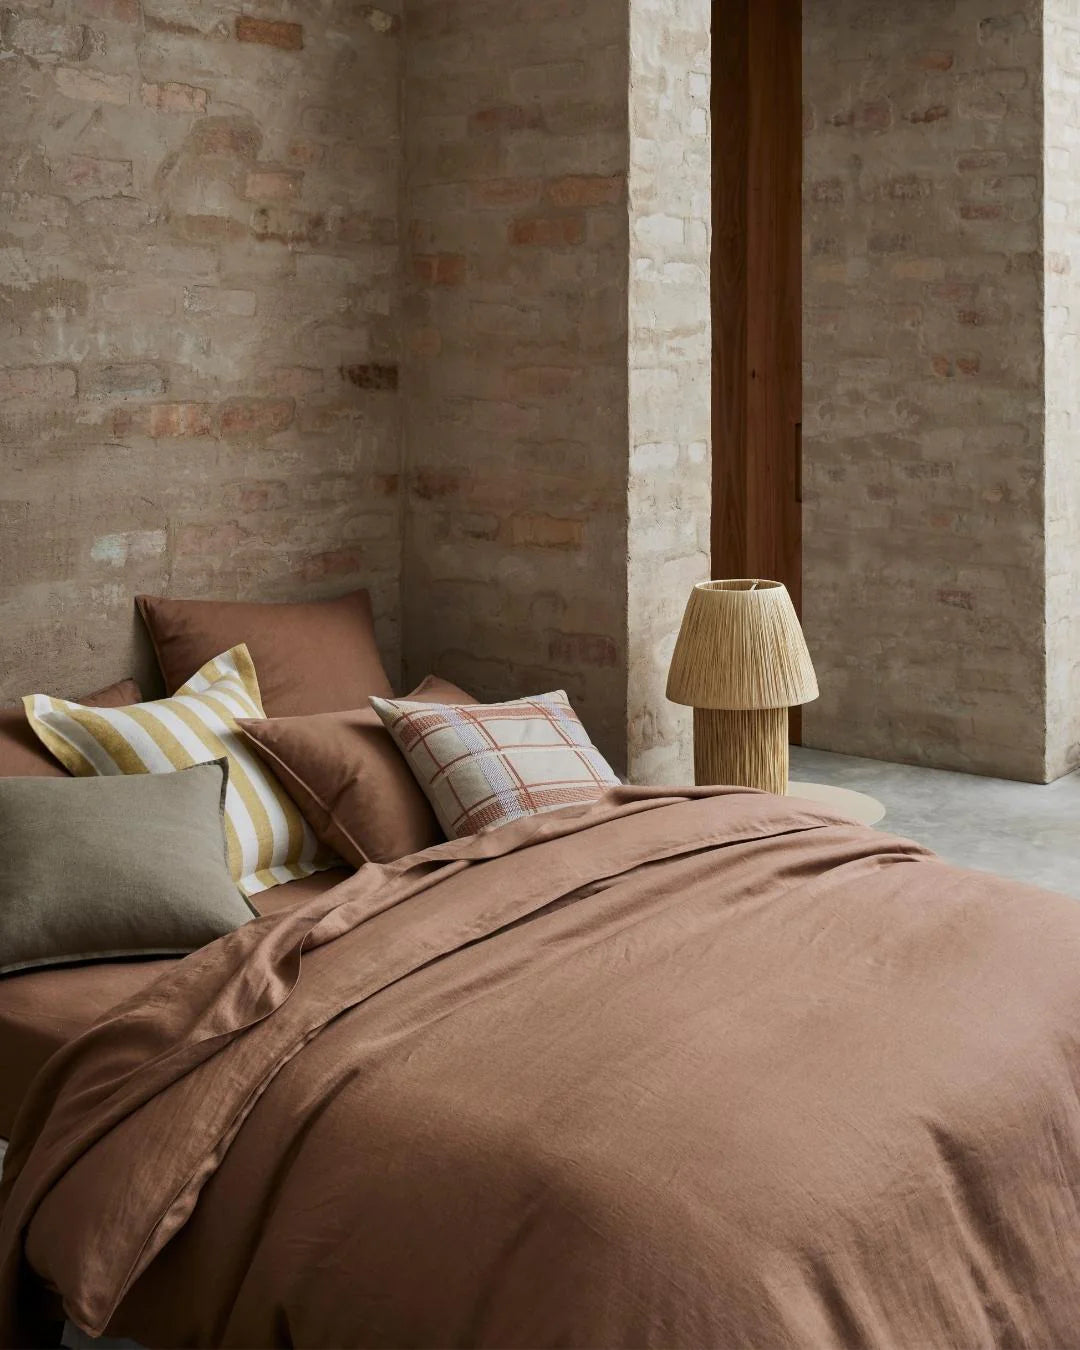 Crafted from the highest quality French Flax Linen, each product from the Ravello range is prewashed and aero finished for a unique and luxuriously soft, relaxed feel, making it a dream to rest and relax in.  The Biscuit colourway is a beautiful, earthy clay that offers warmth and is bound to softly brighten your bedroom while bringing a warm, cosy feel.